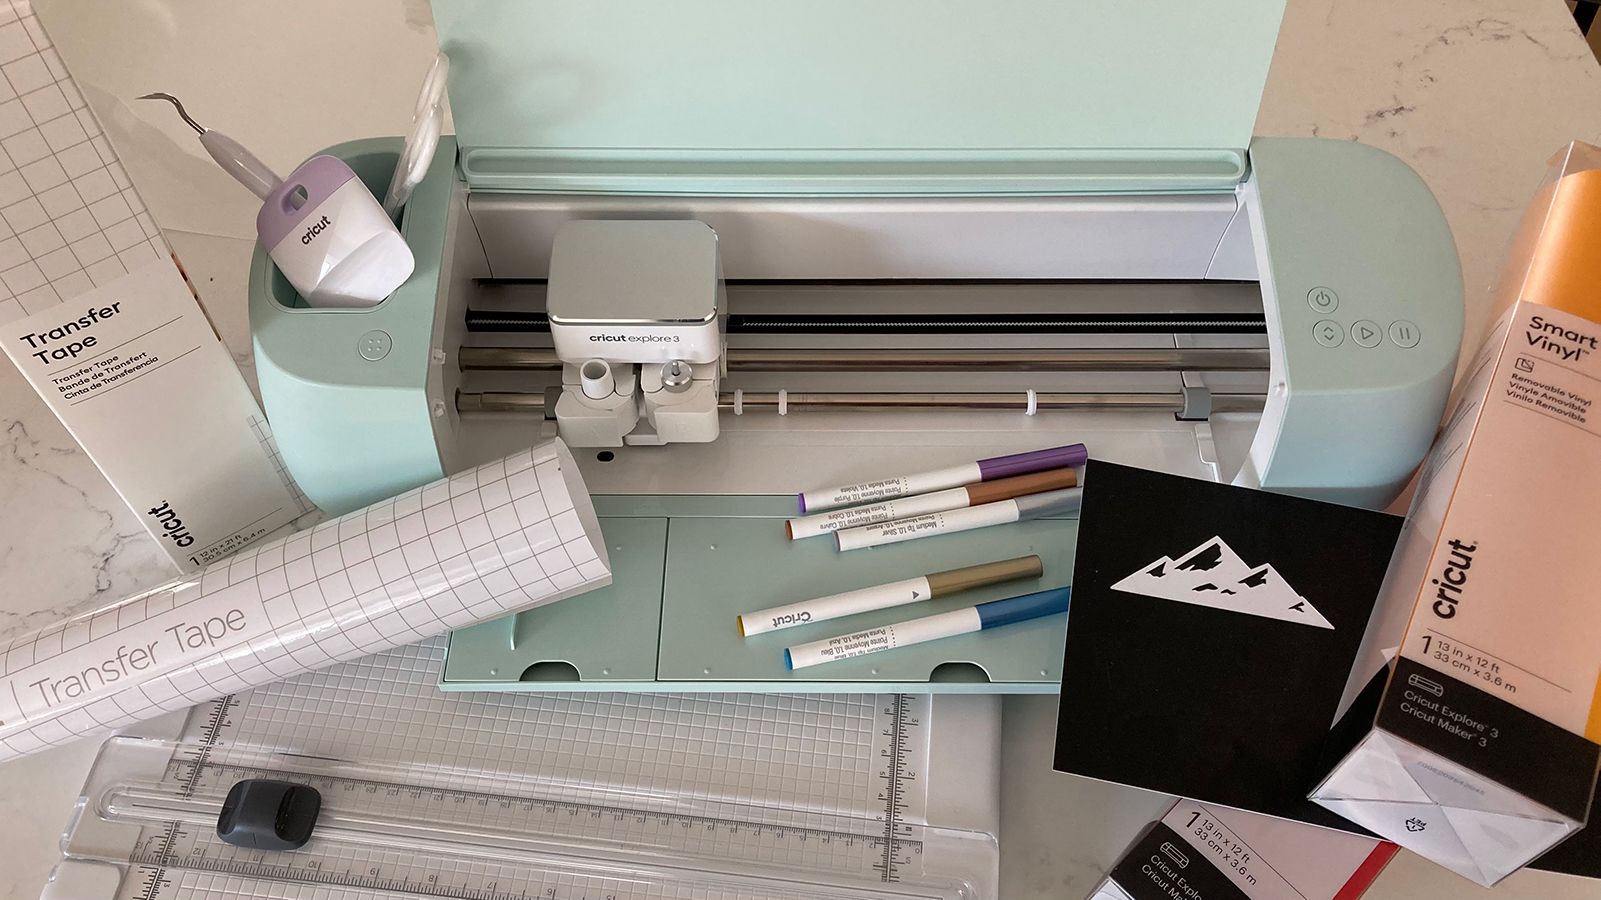 Cricut Transfer Tape 12 ft - Essential Crafting Supply